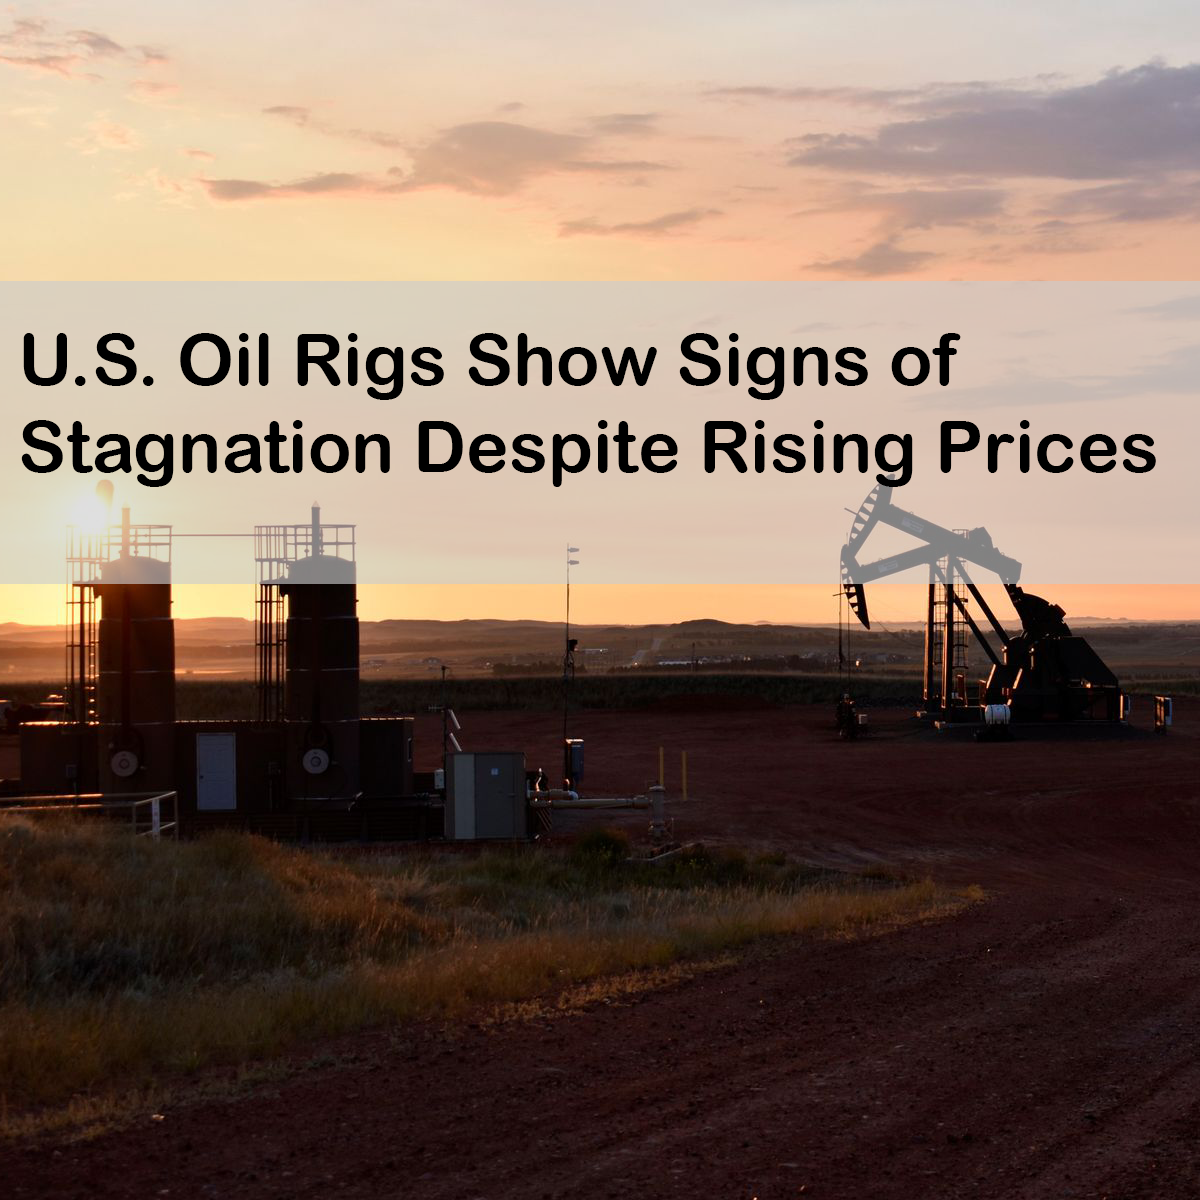 U.S. Oil Rigs Show Signs of Stagnation Despite Rising Prices